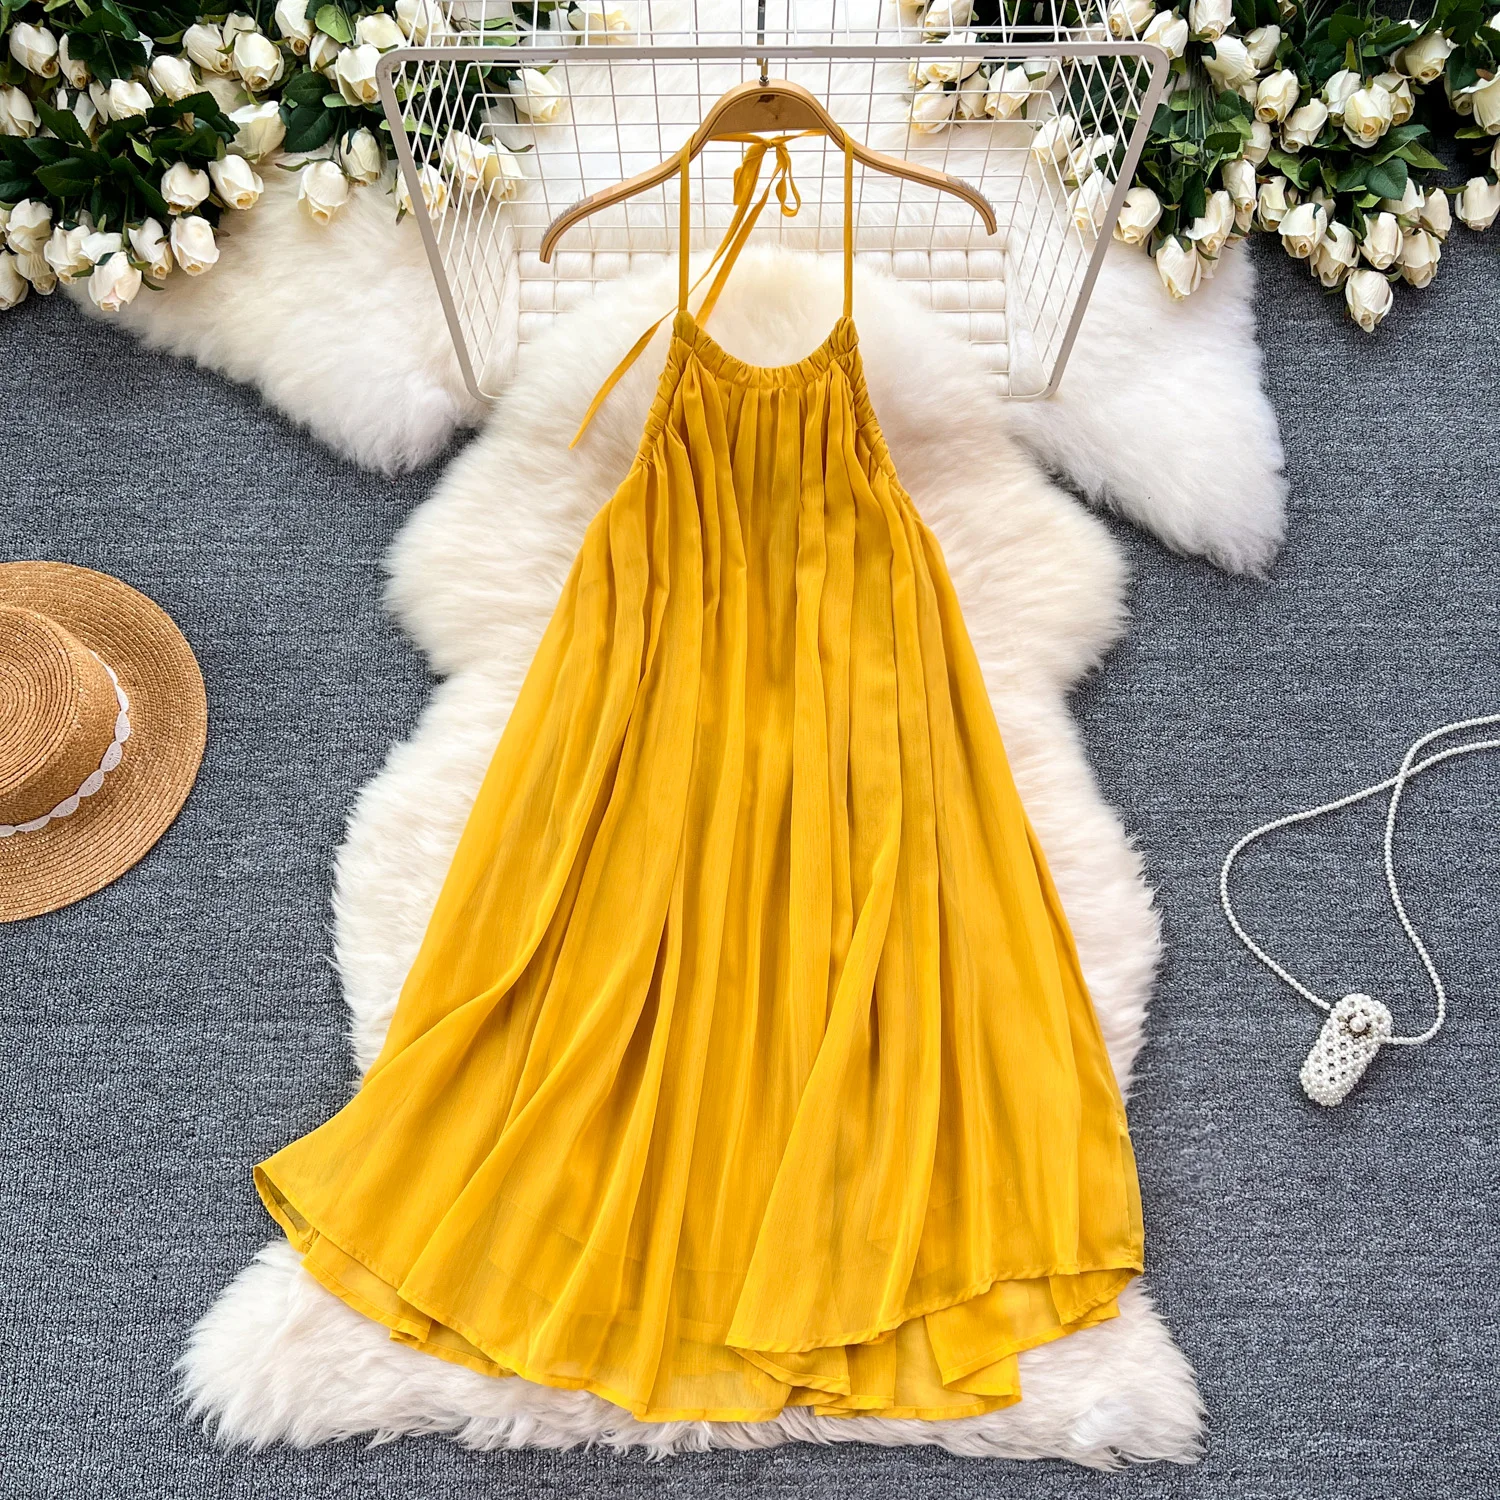 

Chic Hollow Out Backless Elegant Loose Halter Dress Beach Casual Vacation Sleeveless A-line Vestidos Summer Women